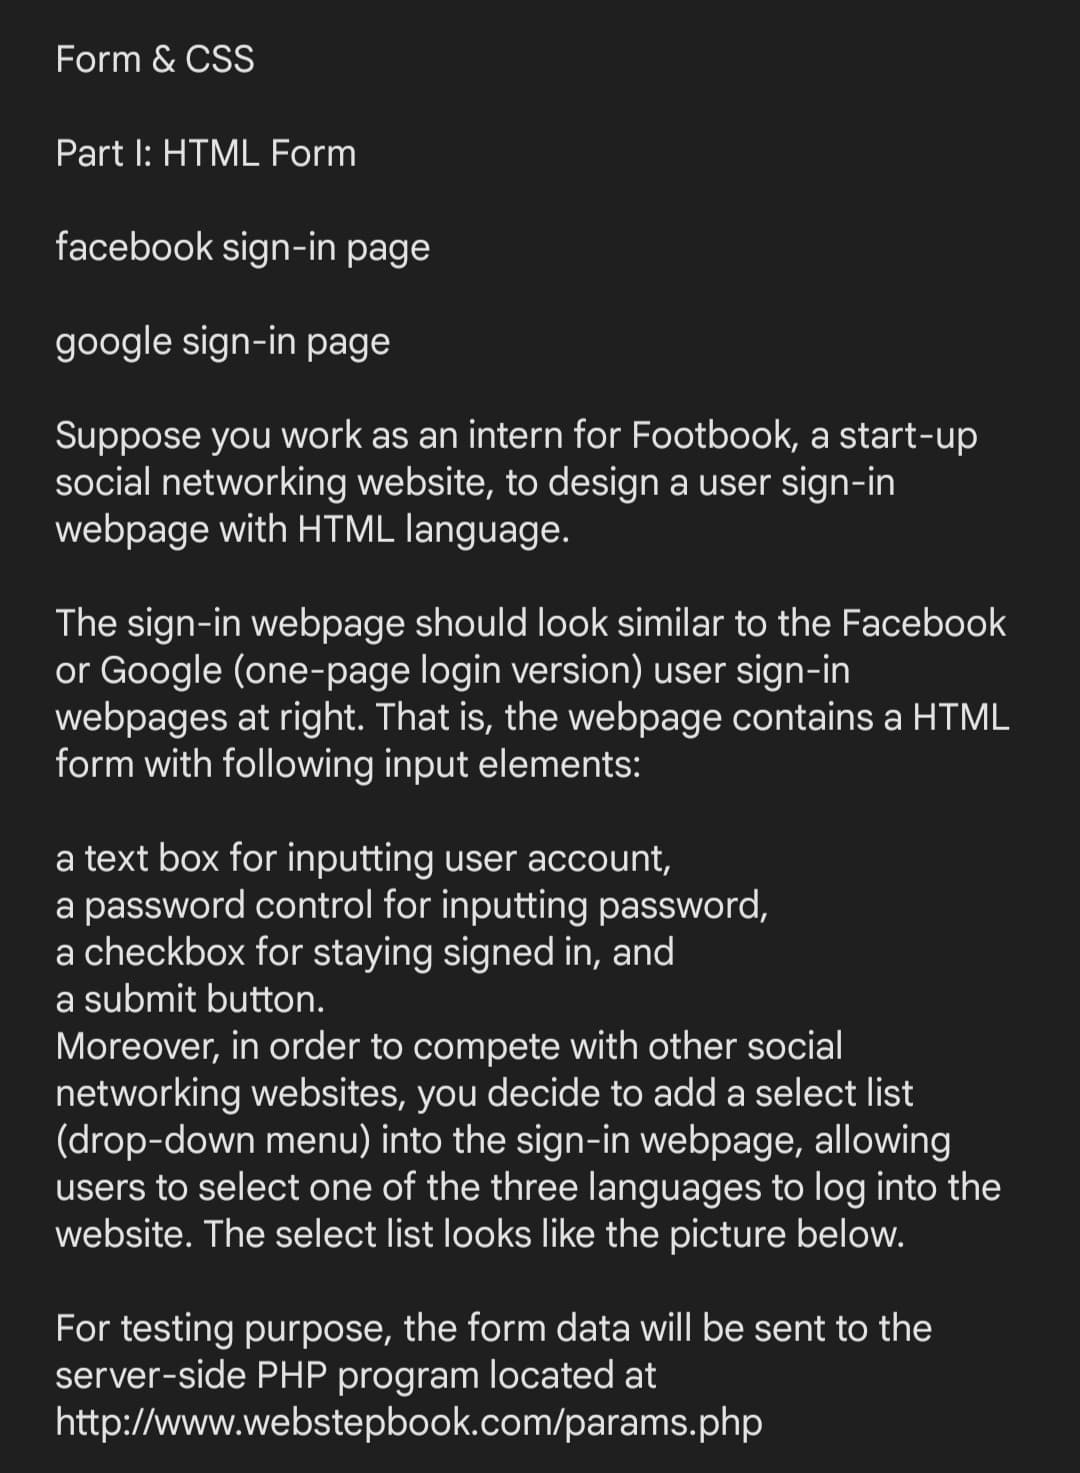 Form & CSS
Part I: HTML Form
facebook sign-in page
google sign-in page
Suppose you work as an intern for Footbook, a start-up
social networking website, to design a user sign-in
webpage with HTML language.
The sign-in webpage should look similar to the Facebook
or Google (one-page login version) user sign-in
webpages at right. That is, the webpage contains a HTML
form with following input elements:
a text box for inputting user account,
a password control for inputting password,
a checkbox for staying signed in, and
a submit button.
Moreover, in order to compete with other social
networking websites, you decide to add a select list
(drop-down menu) into the sign-in webpage, allowing
users to select one of the three languages to log into the
website. The select list looks like the picture below.
For testing purpose, the form data will be sent to the
server-side PHP program located at
http://www.webstepbook.com/params.php
